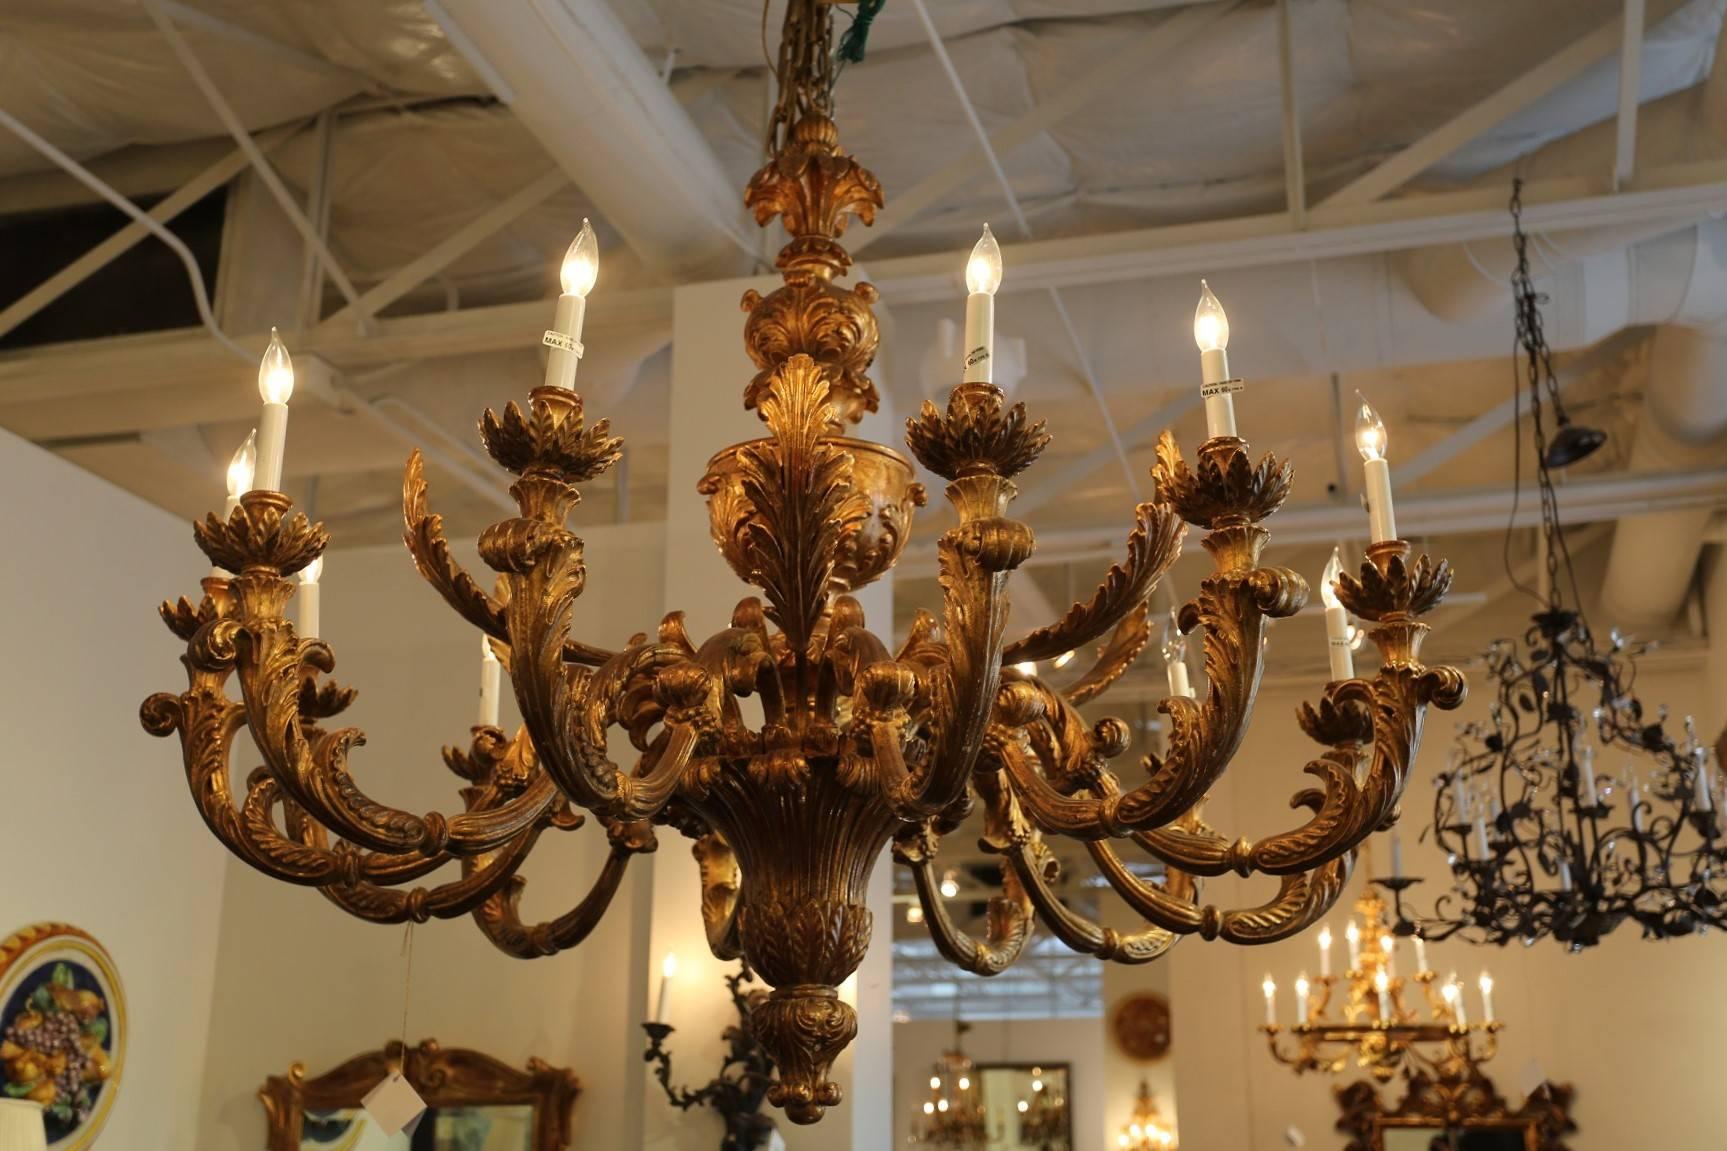 This grand 18th century Renaissance style recreation of an exquisite hand-carved one-tier chandelier with 12 lights measures an impressive 56 inches across and 48